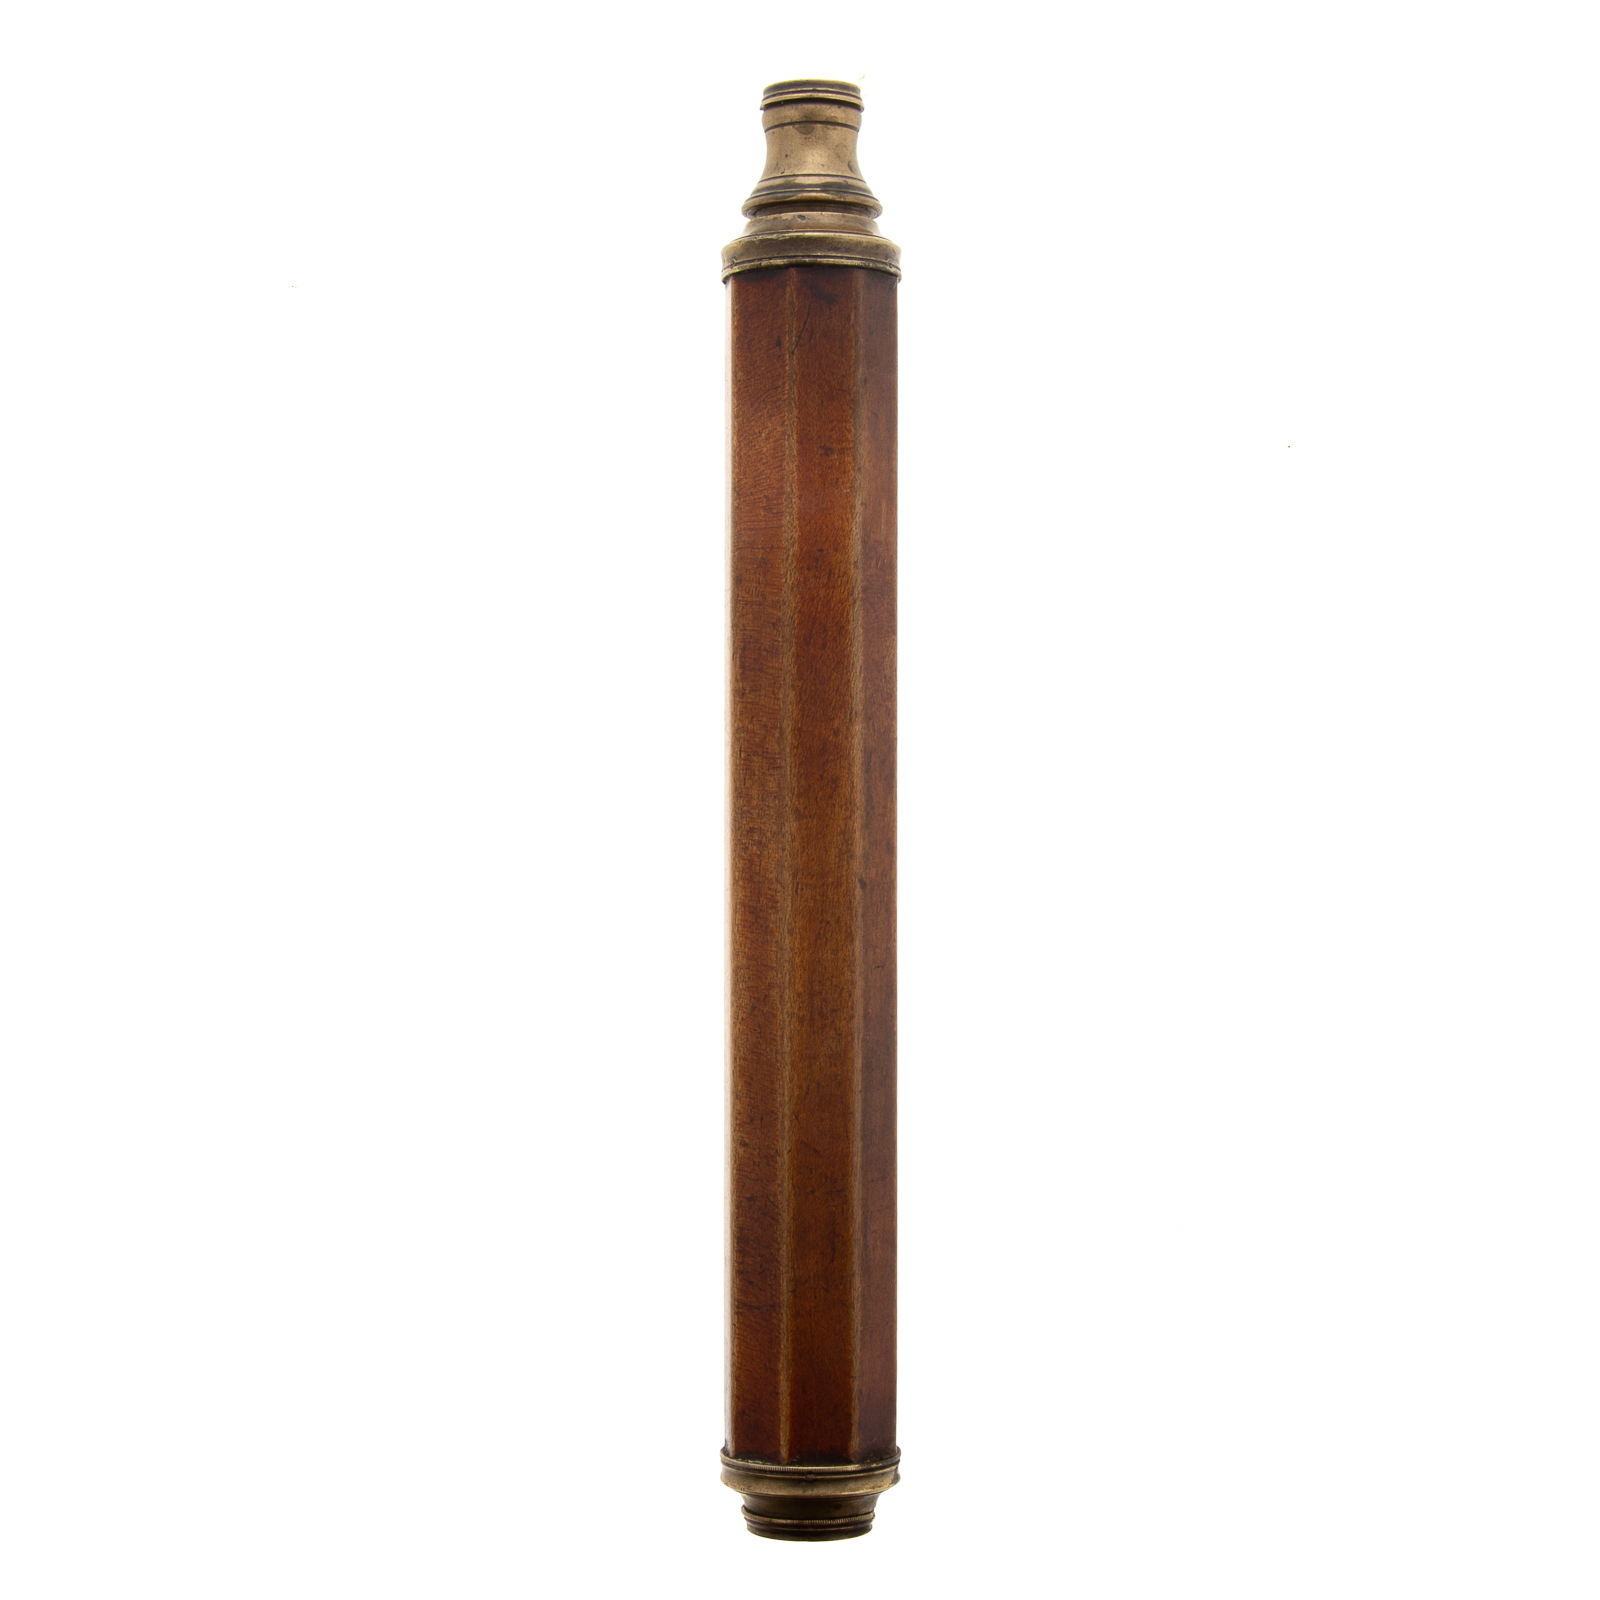 POCKET TELESCOPE WITH 8-SIDED WOODEN